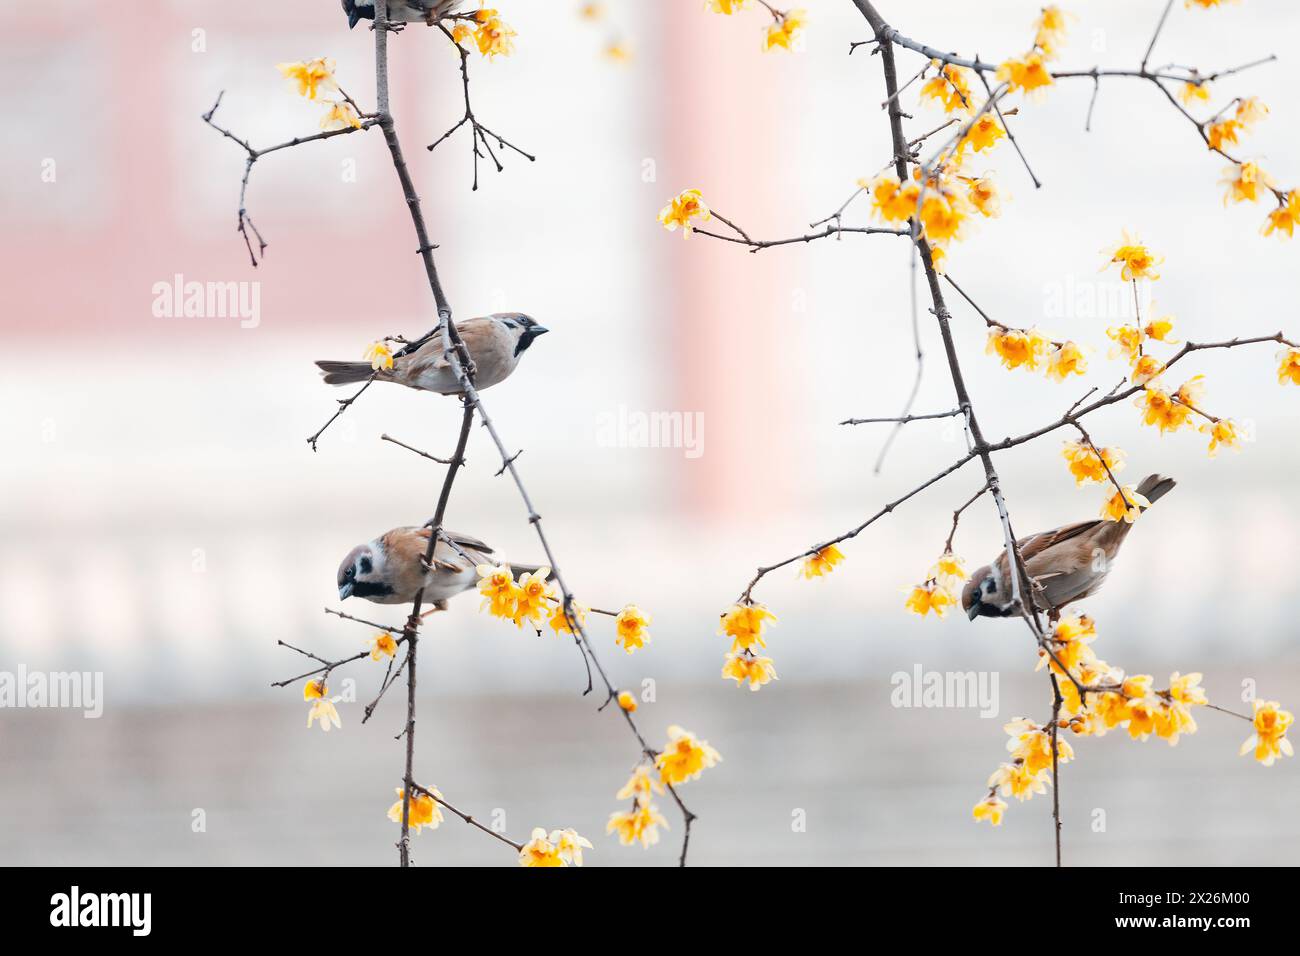 Sparrows Falling on Branches Stock Photo